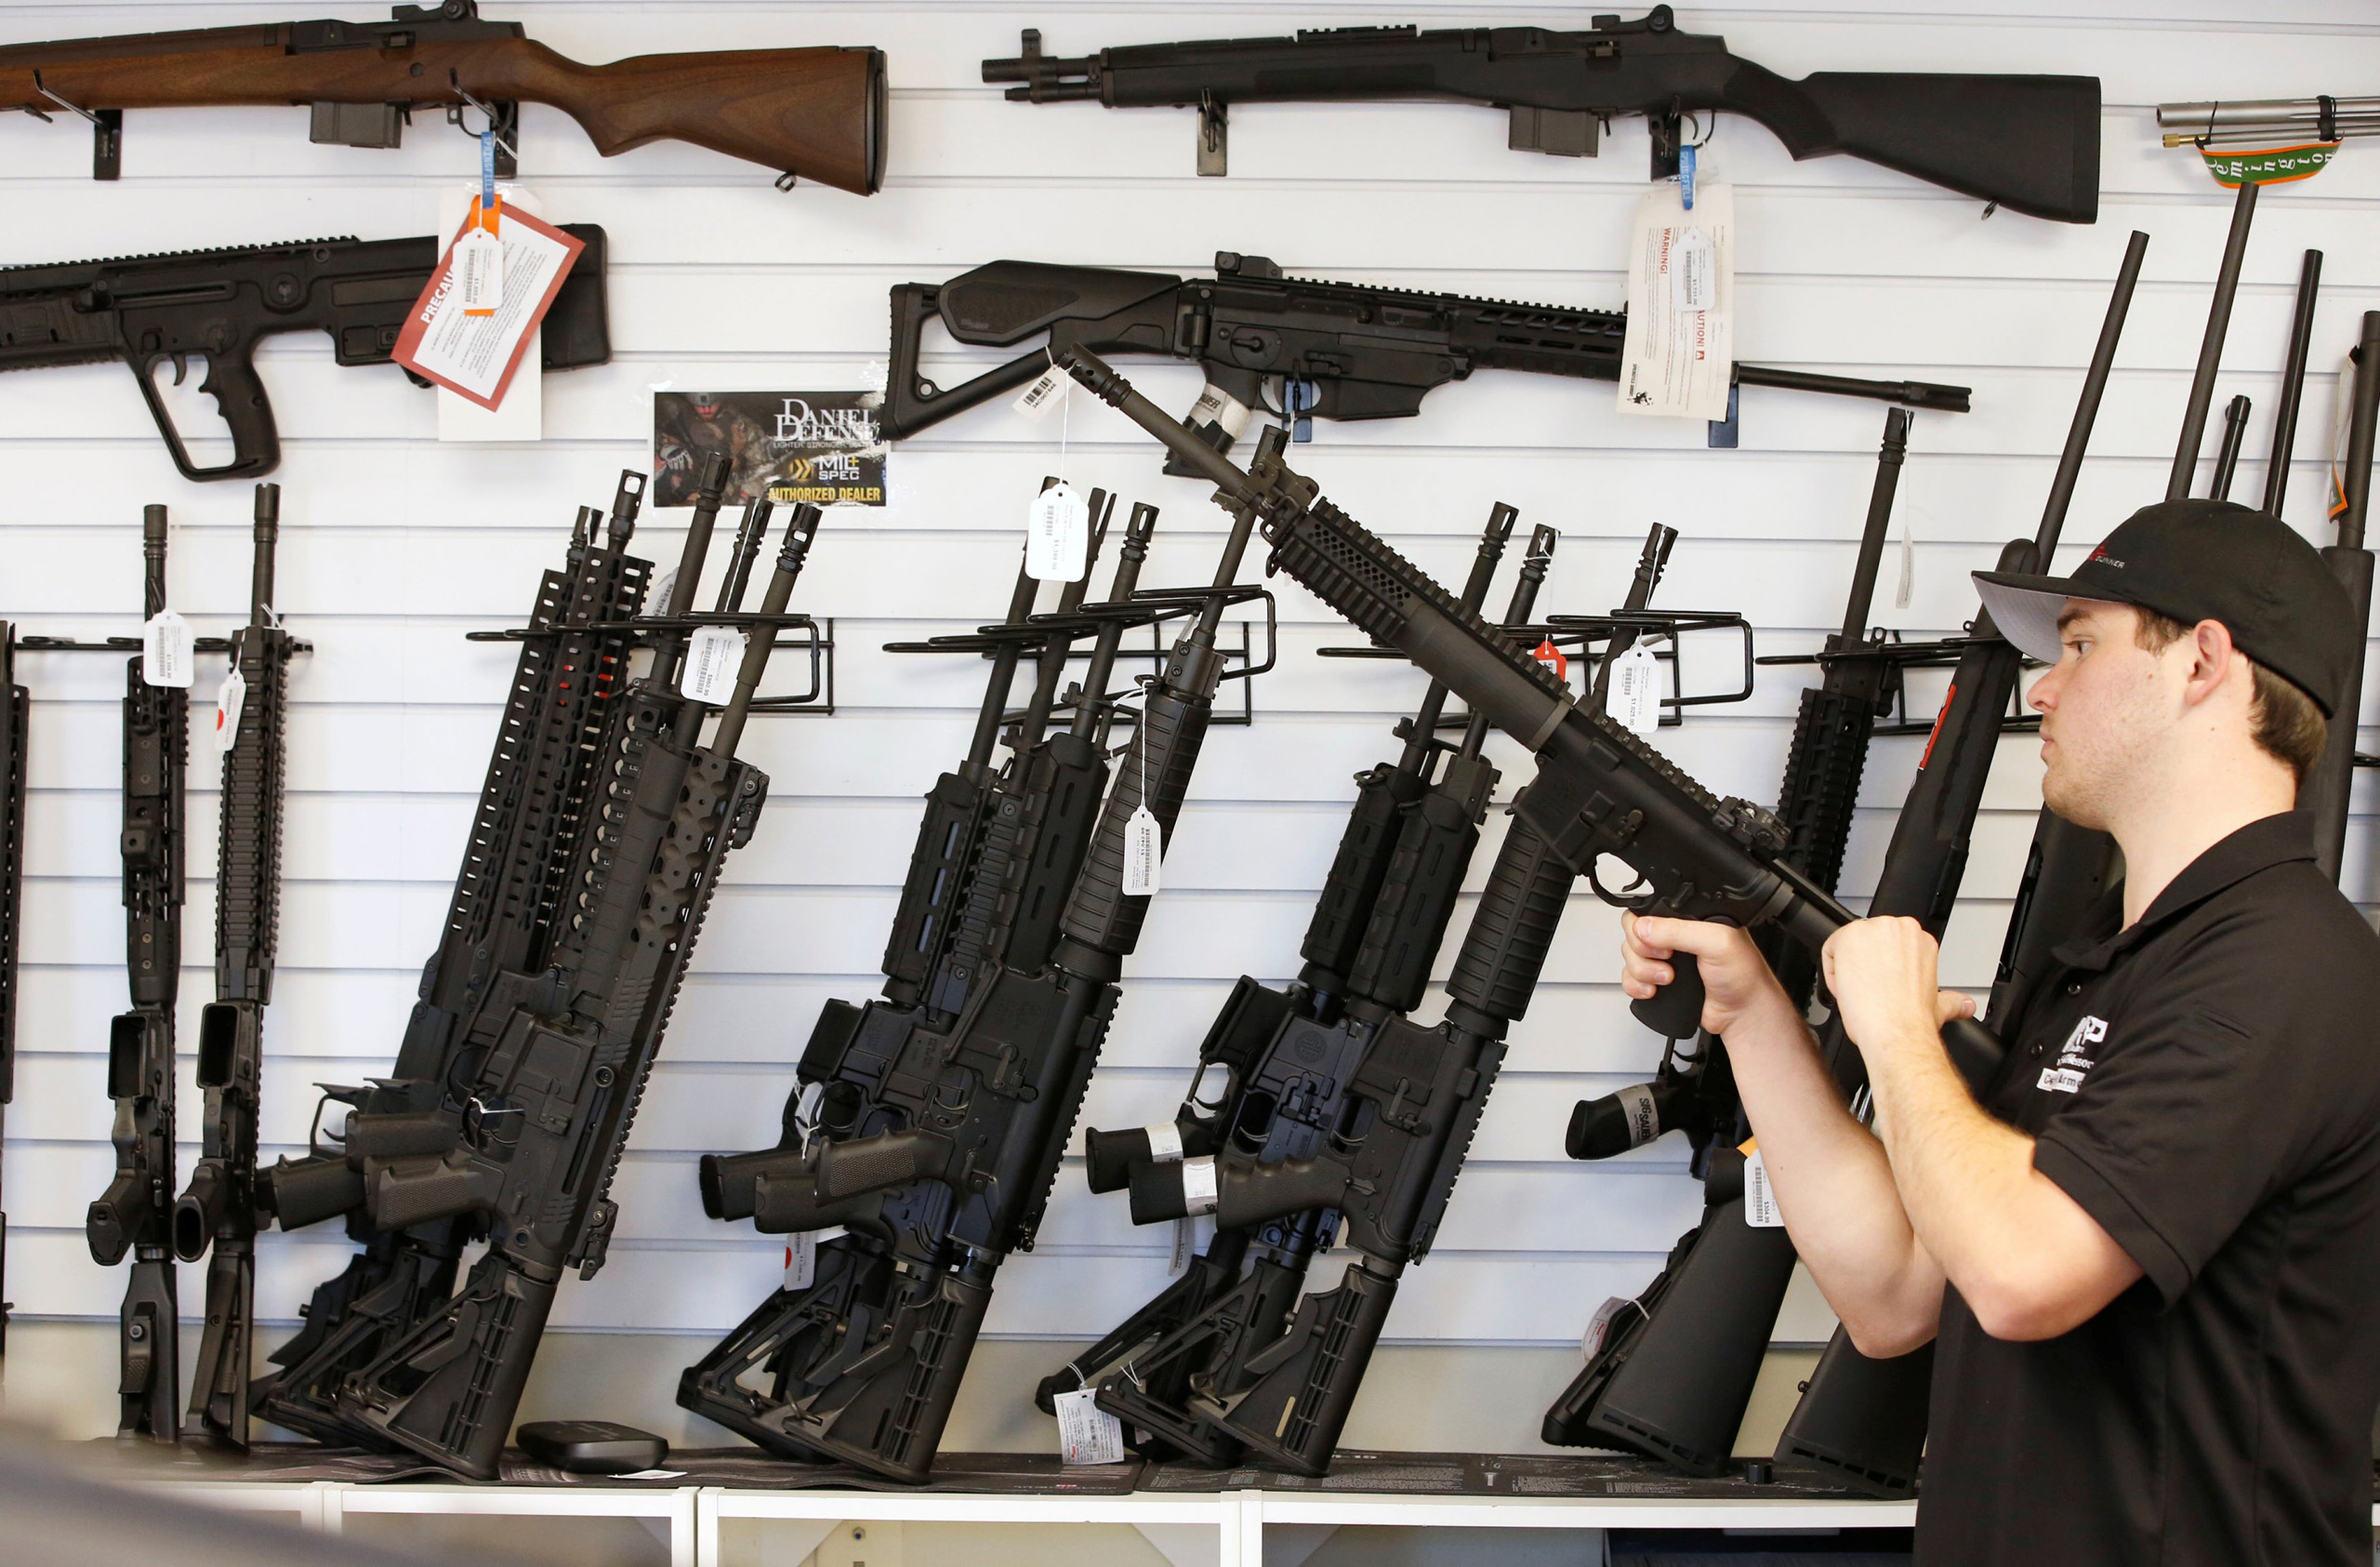 Salesman Ryan Martinez clears the chamber of an AR-15 at the "Ready Gunner" gun store In Provo